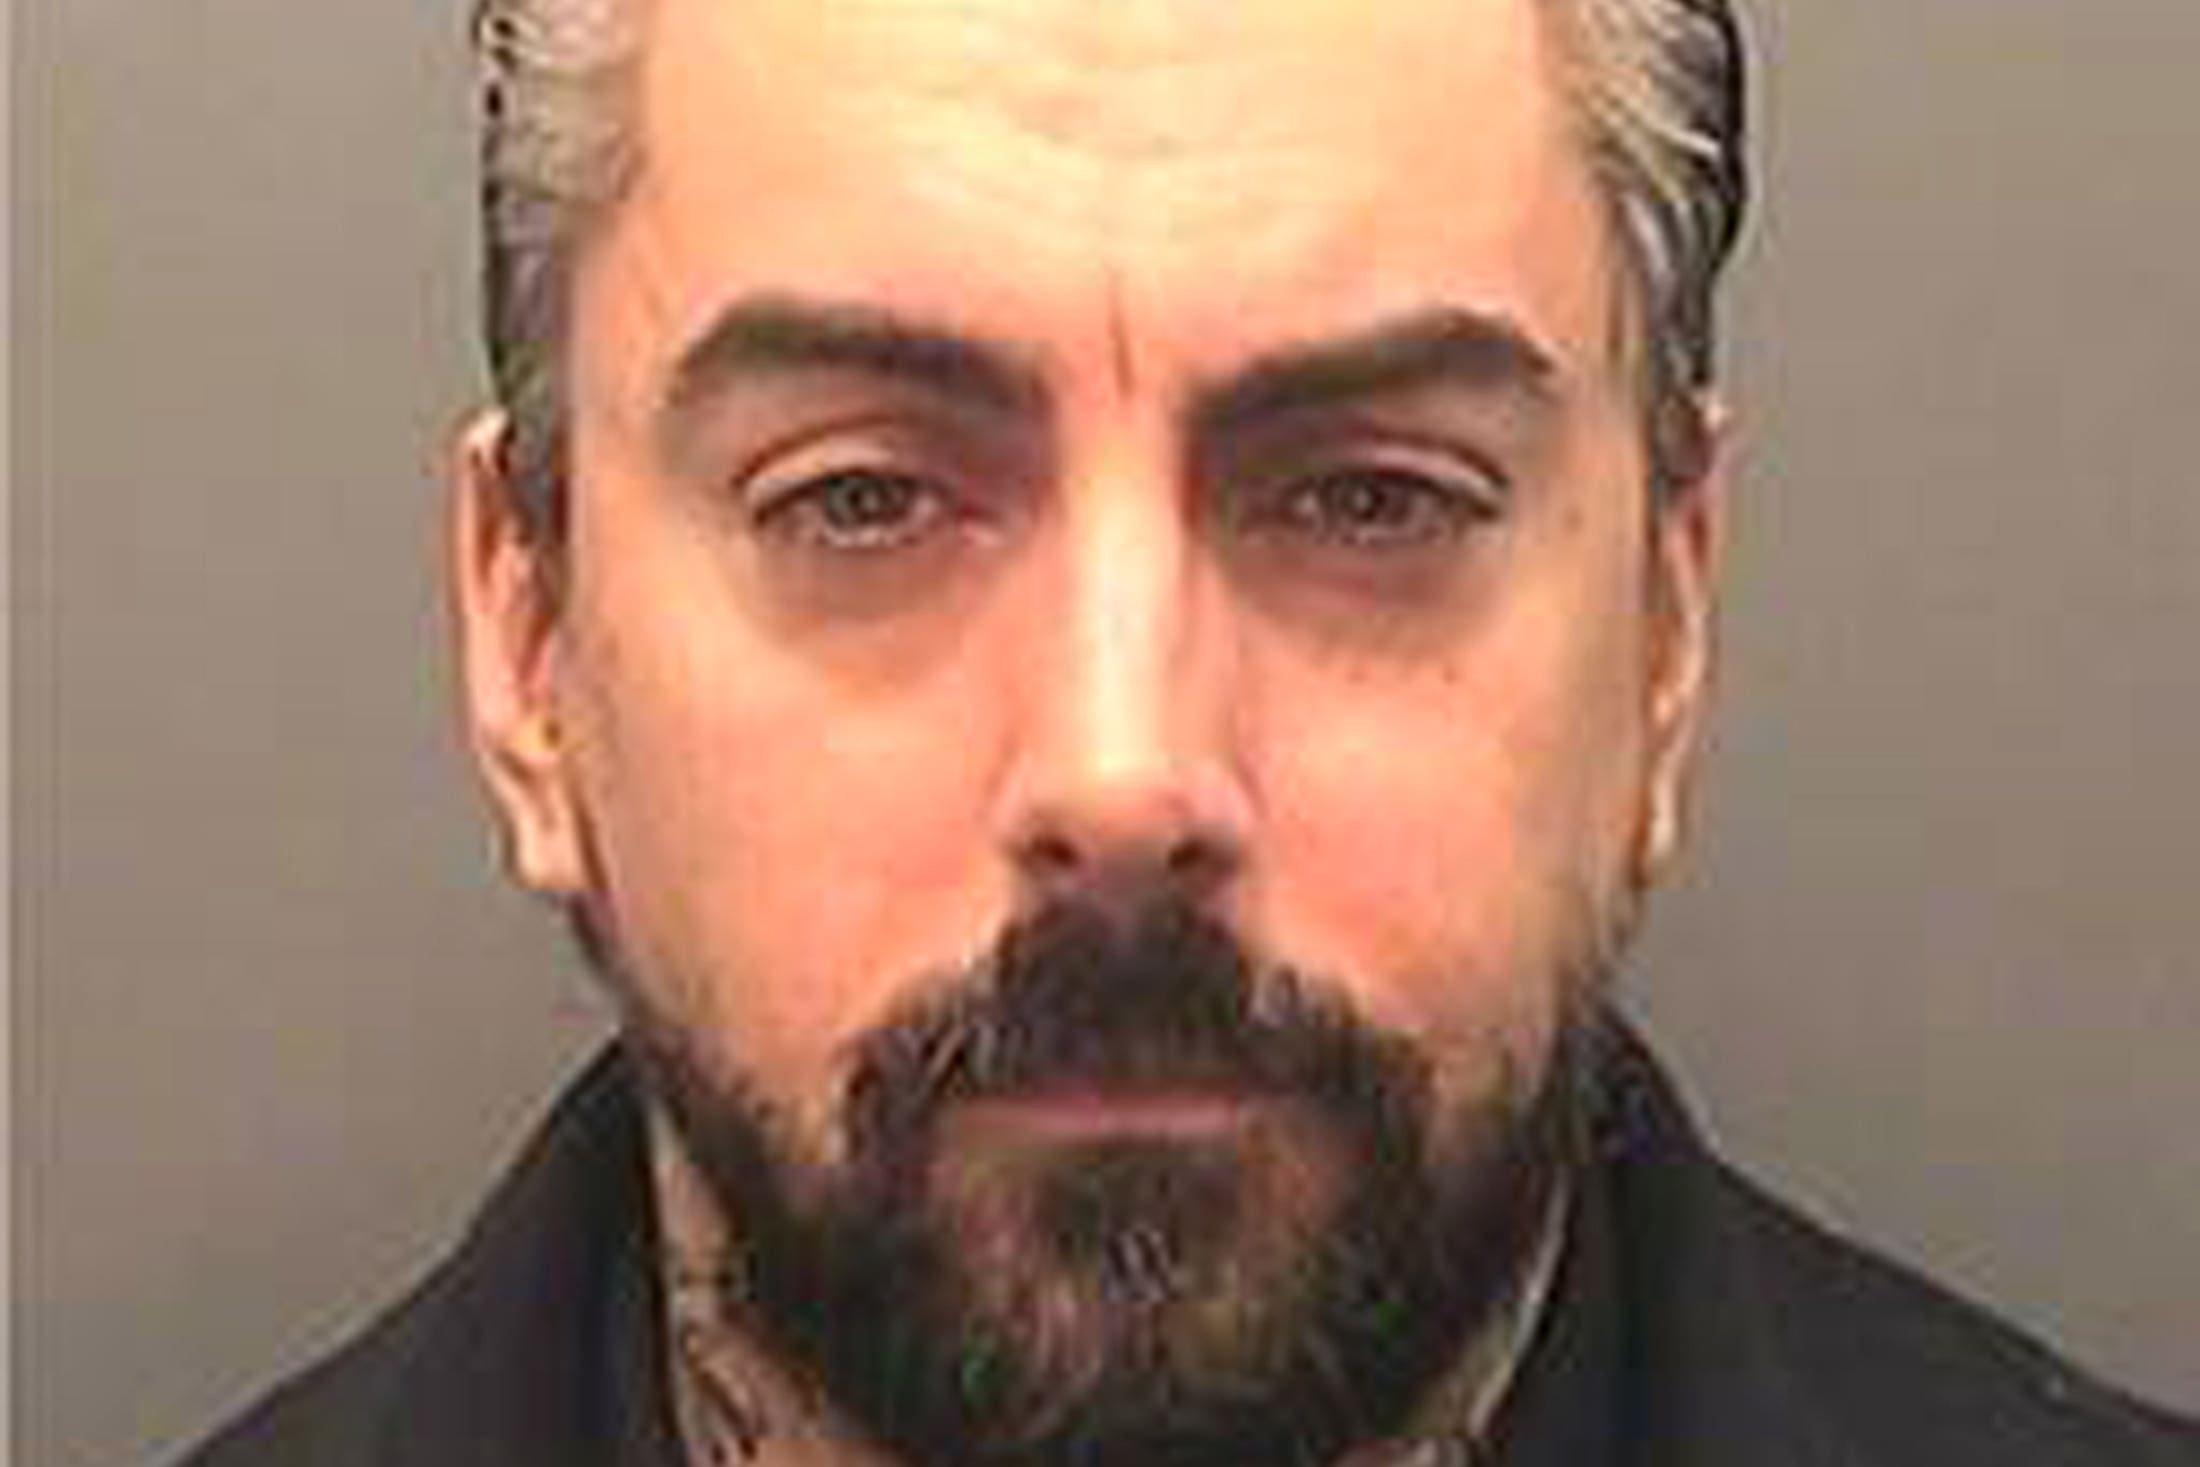 The former Lostprophets frontman is serving a 29 year sentence